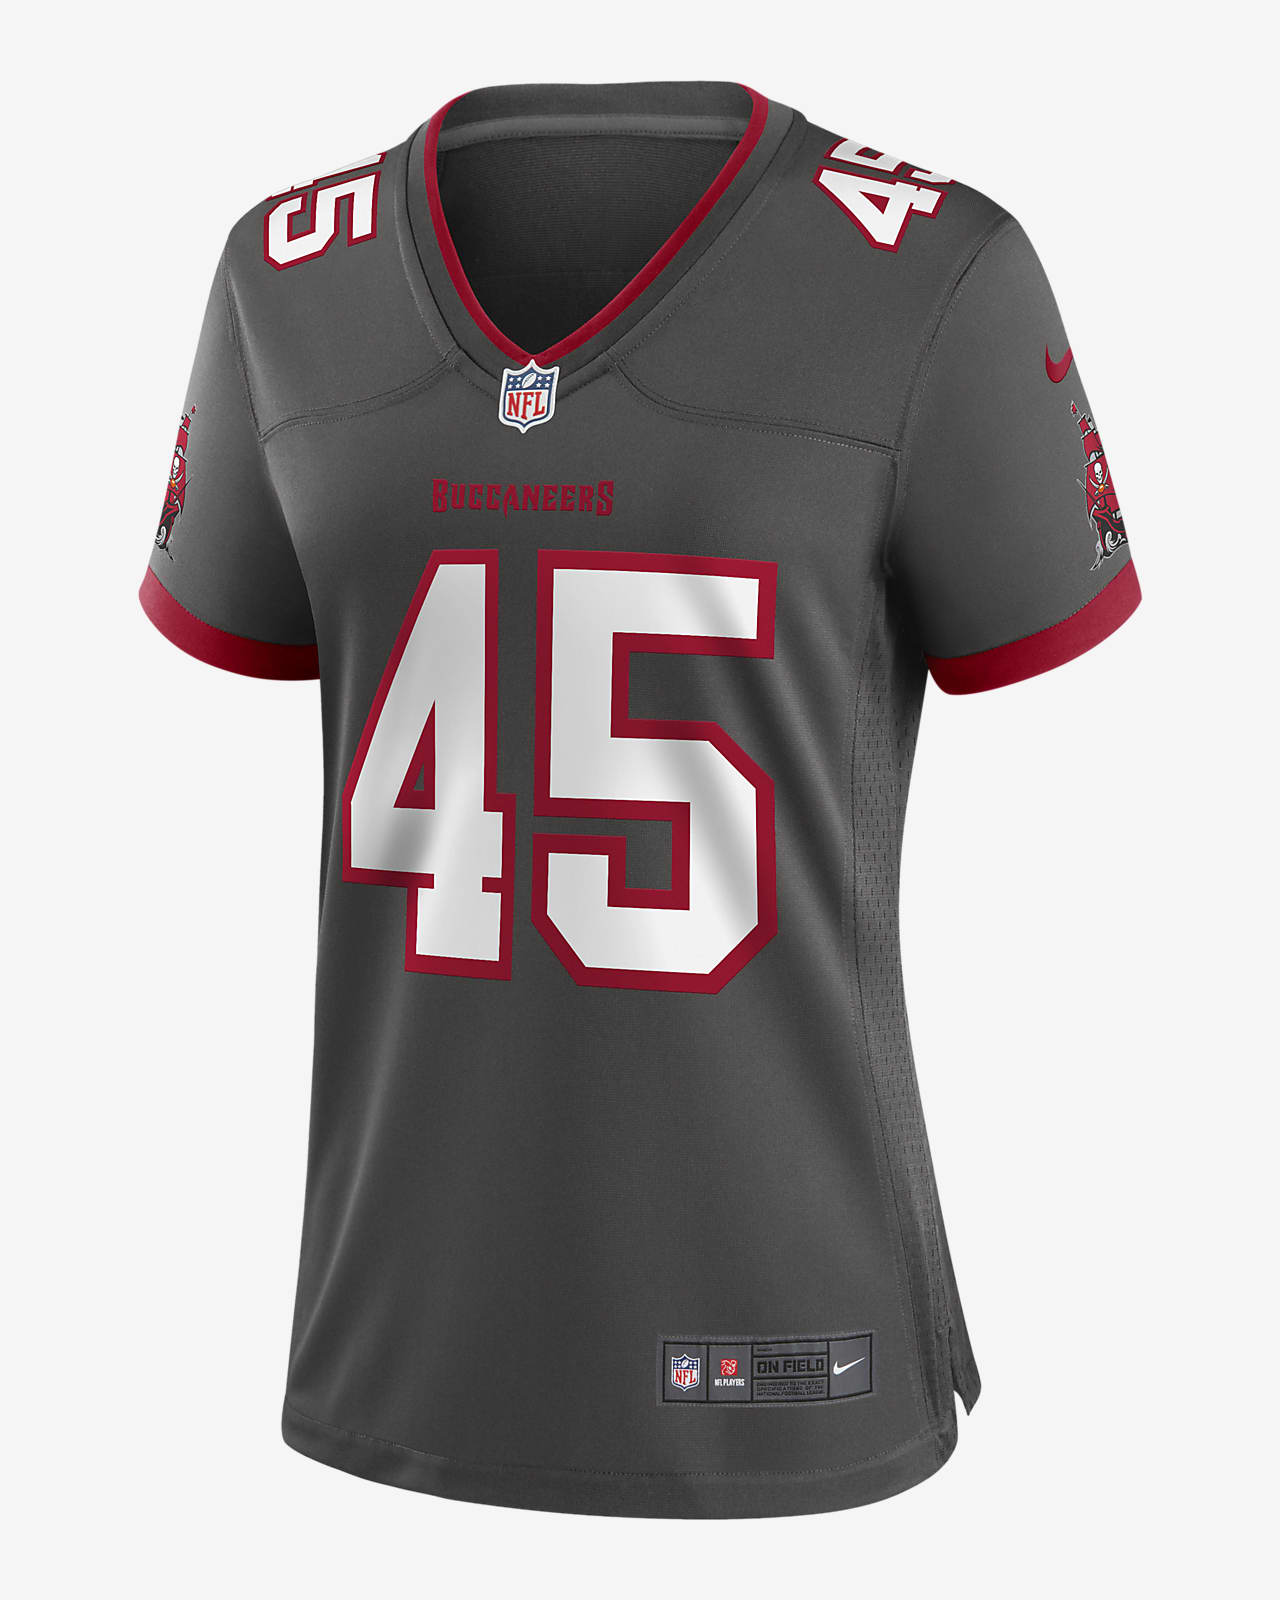 NFL Tampa Bay Buccaneers (Devin White) Women's Game Football Jersey